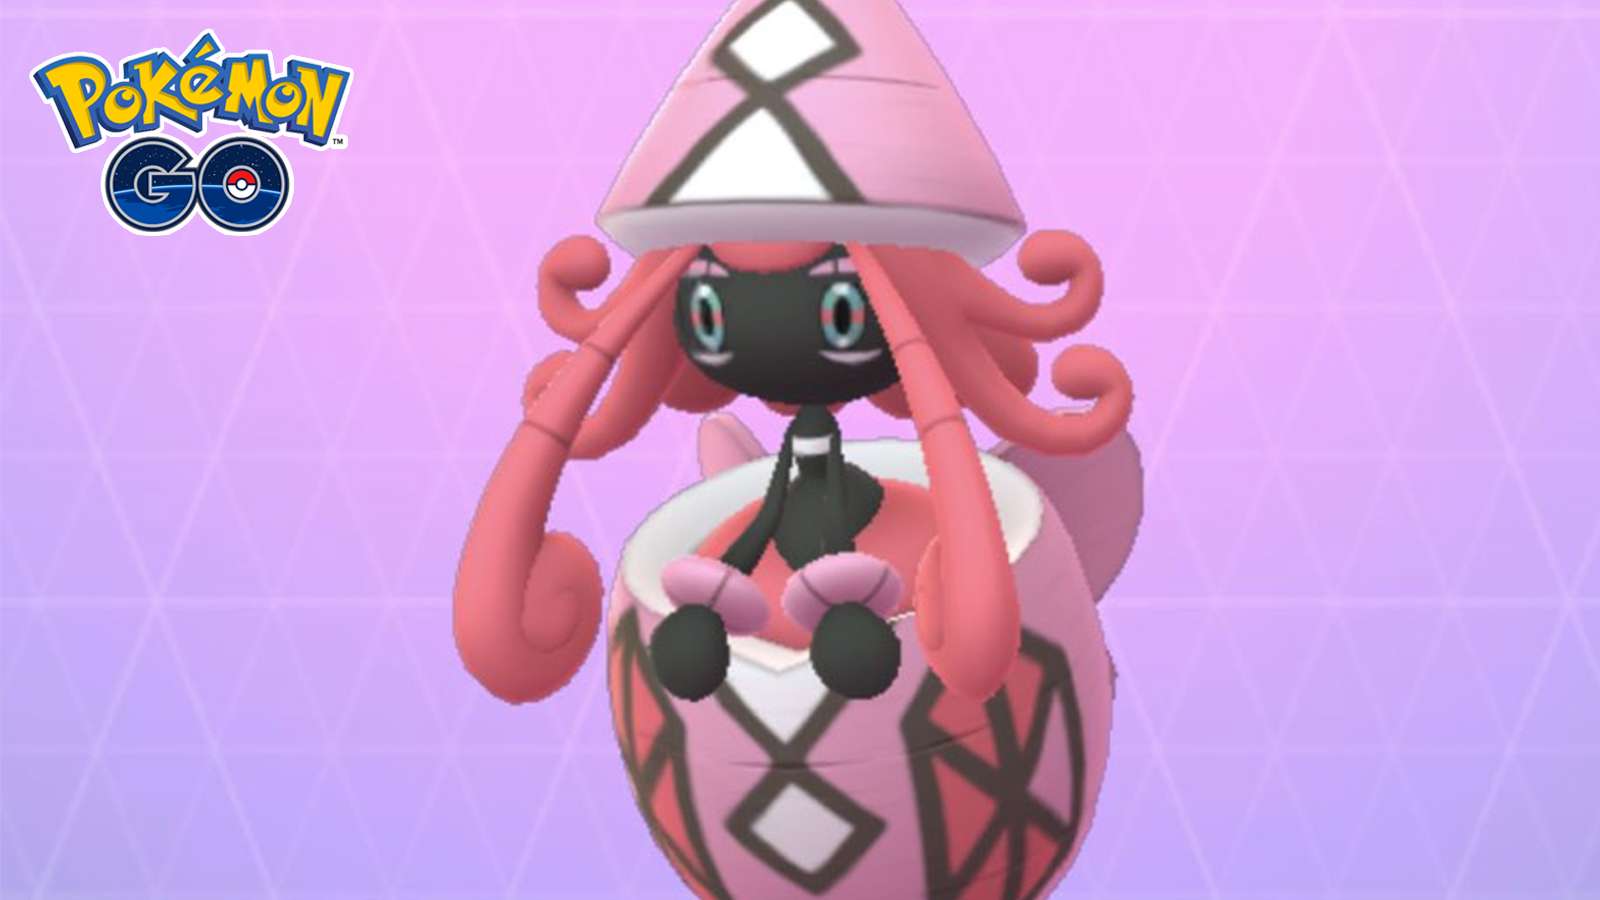 Tapu Lele appearing in Pokemon Go with its best moveset